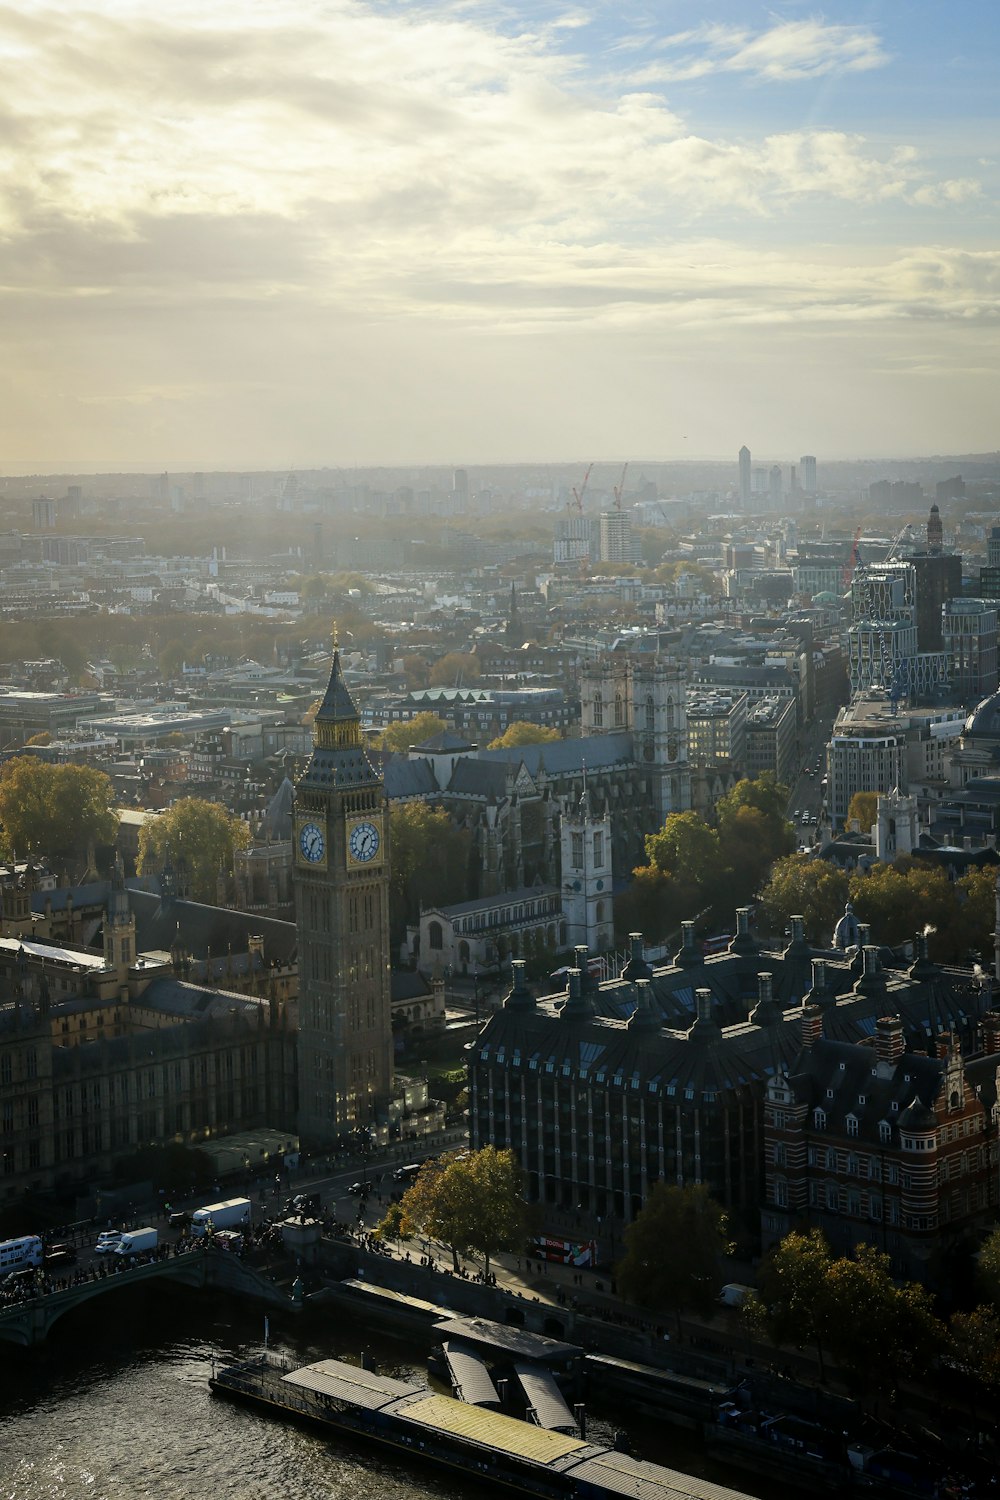 a view of the city of london from the top of a tower